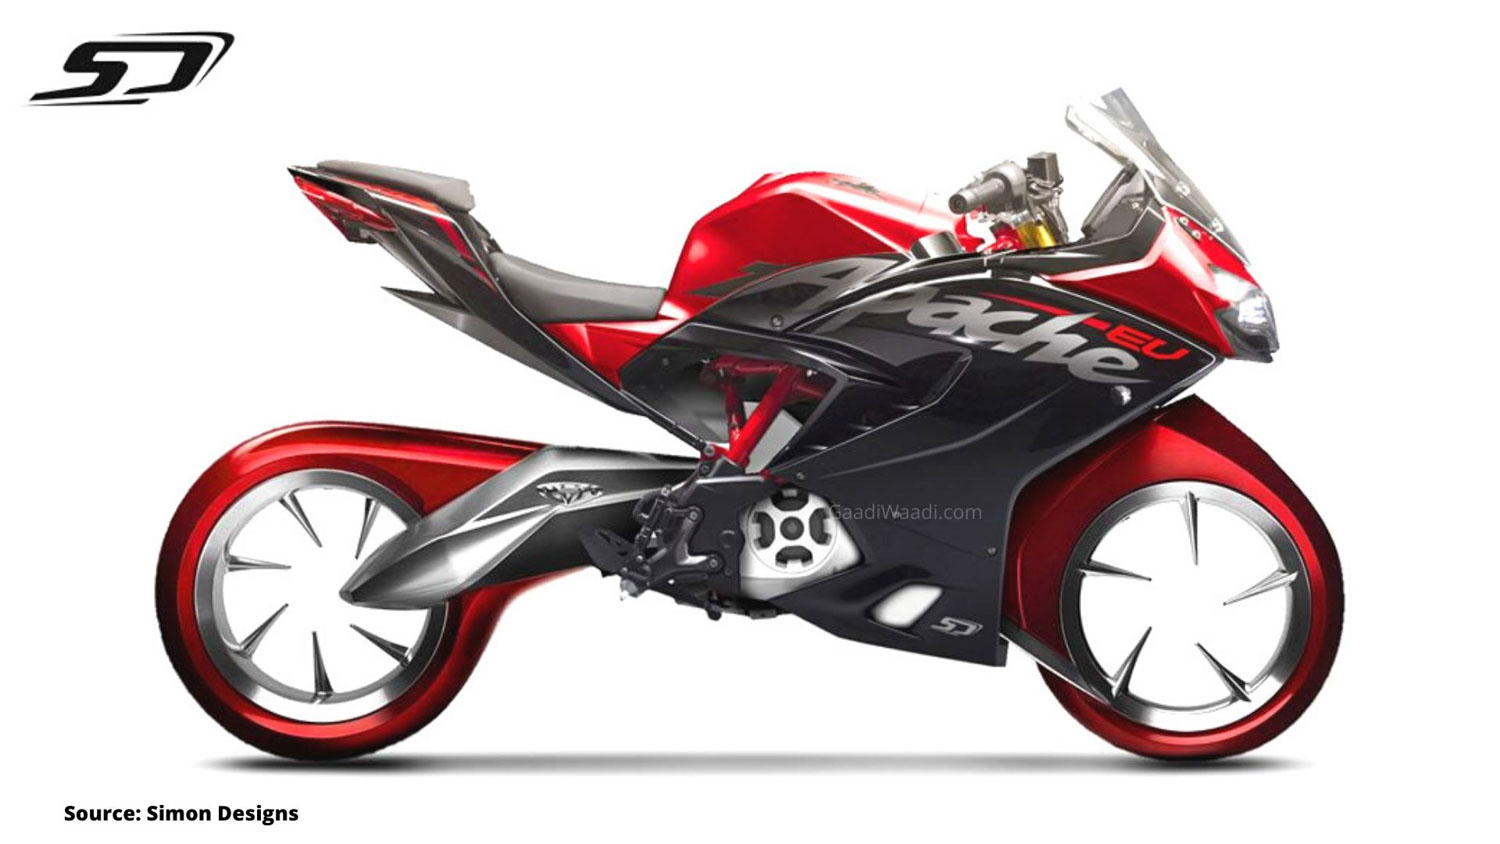 Tvs Apache Rr310 Reimagined As A Futuristic Electric Motorcycle